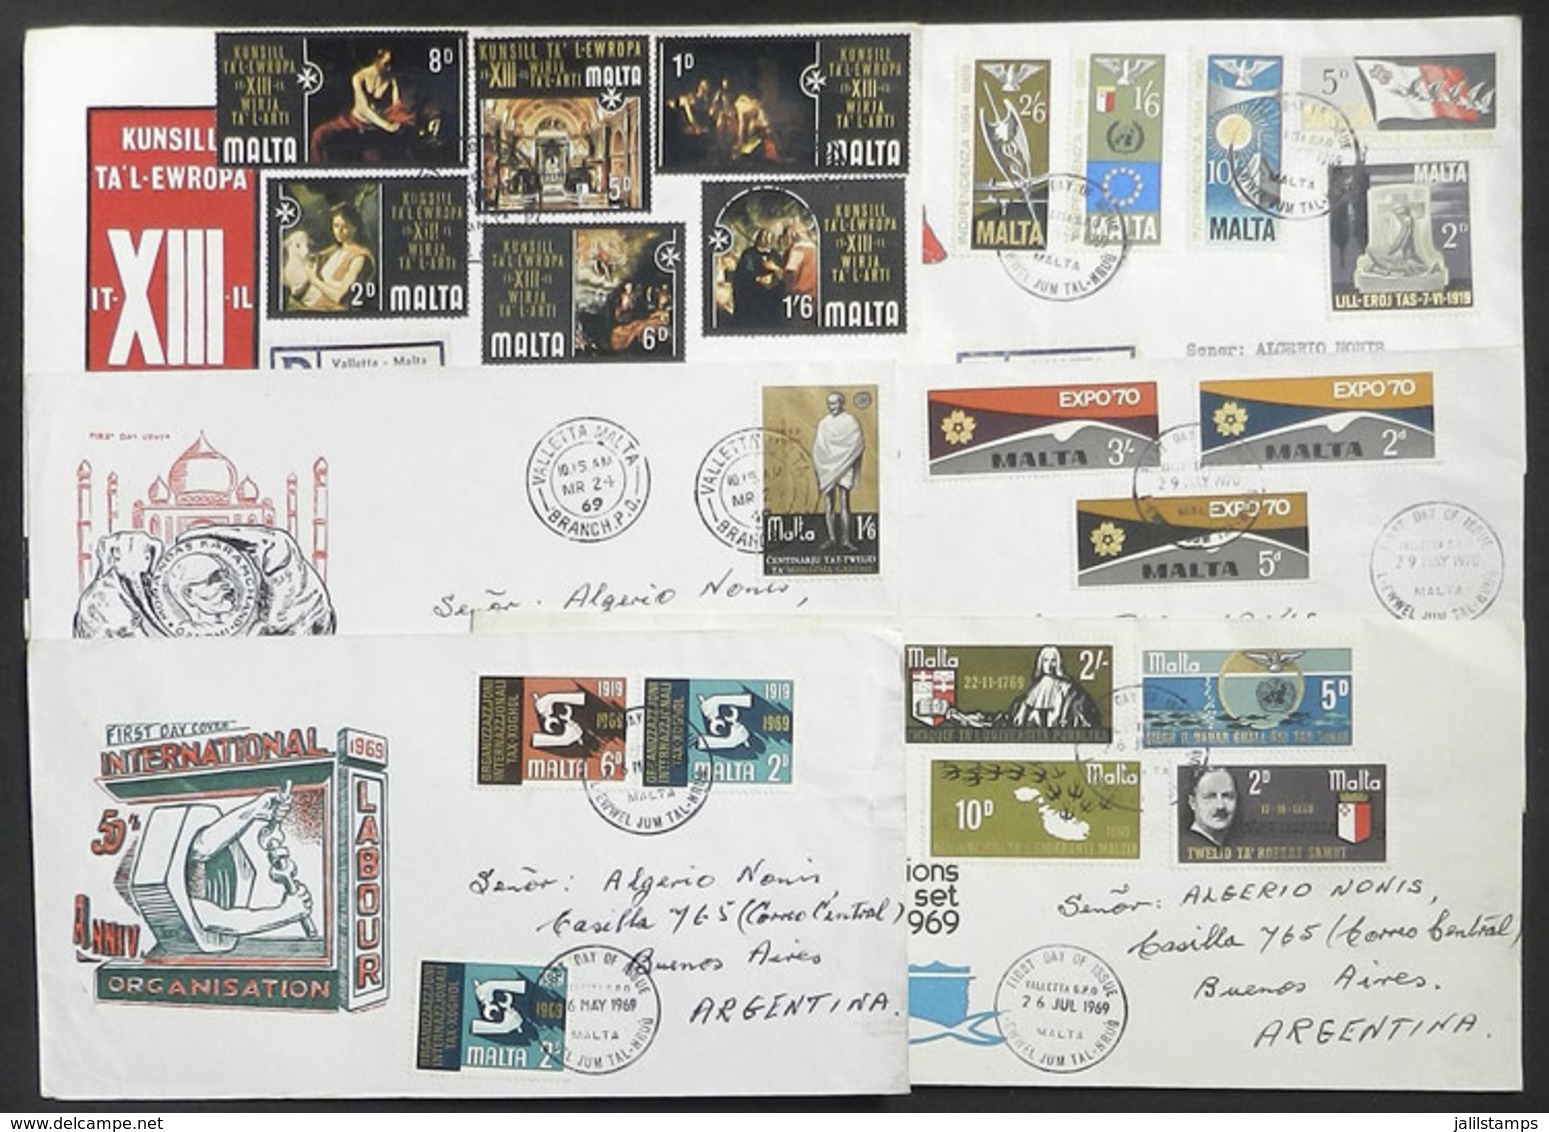 MALTA: 6 Very Thematic FDC Covers Sent To Argentina In 1969/70 - Malta